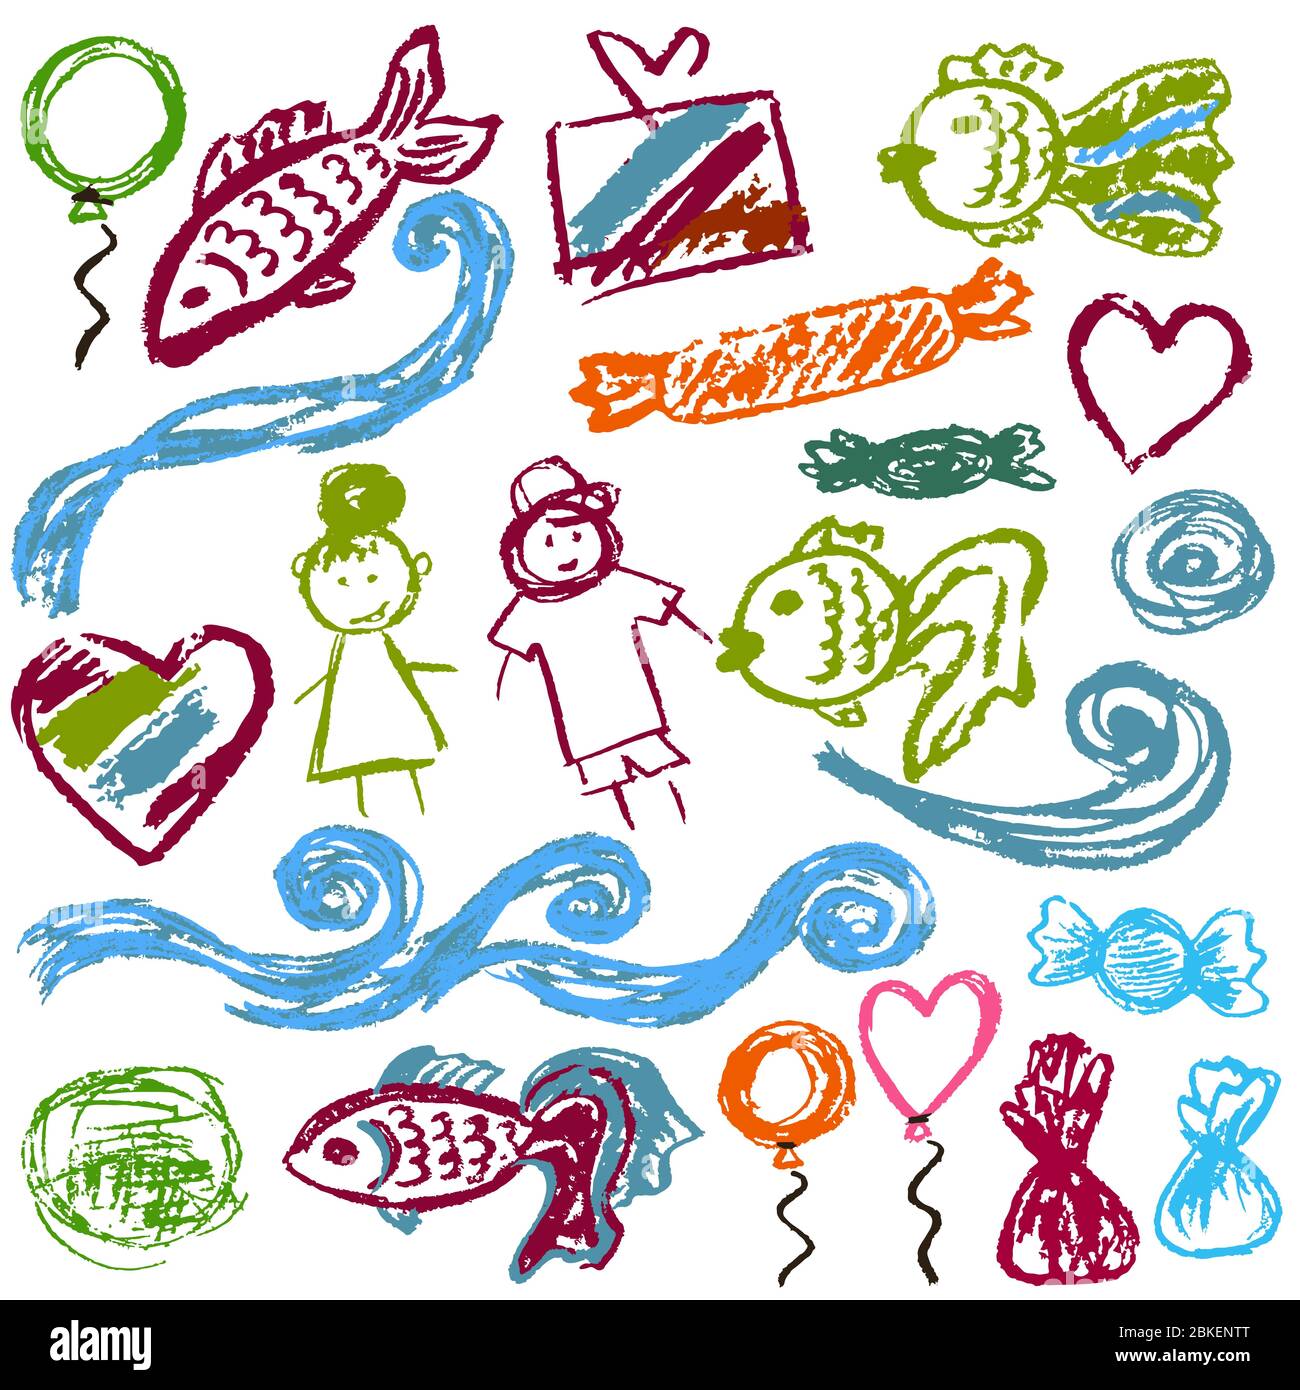 Set elements for your creativity. Children's drawings of wax crayons on a white background. Waves, fish, people, sweets Stock Vector